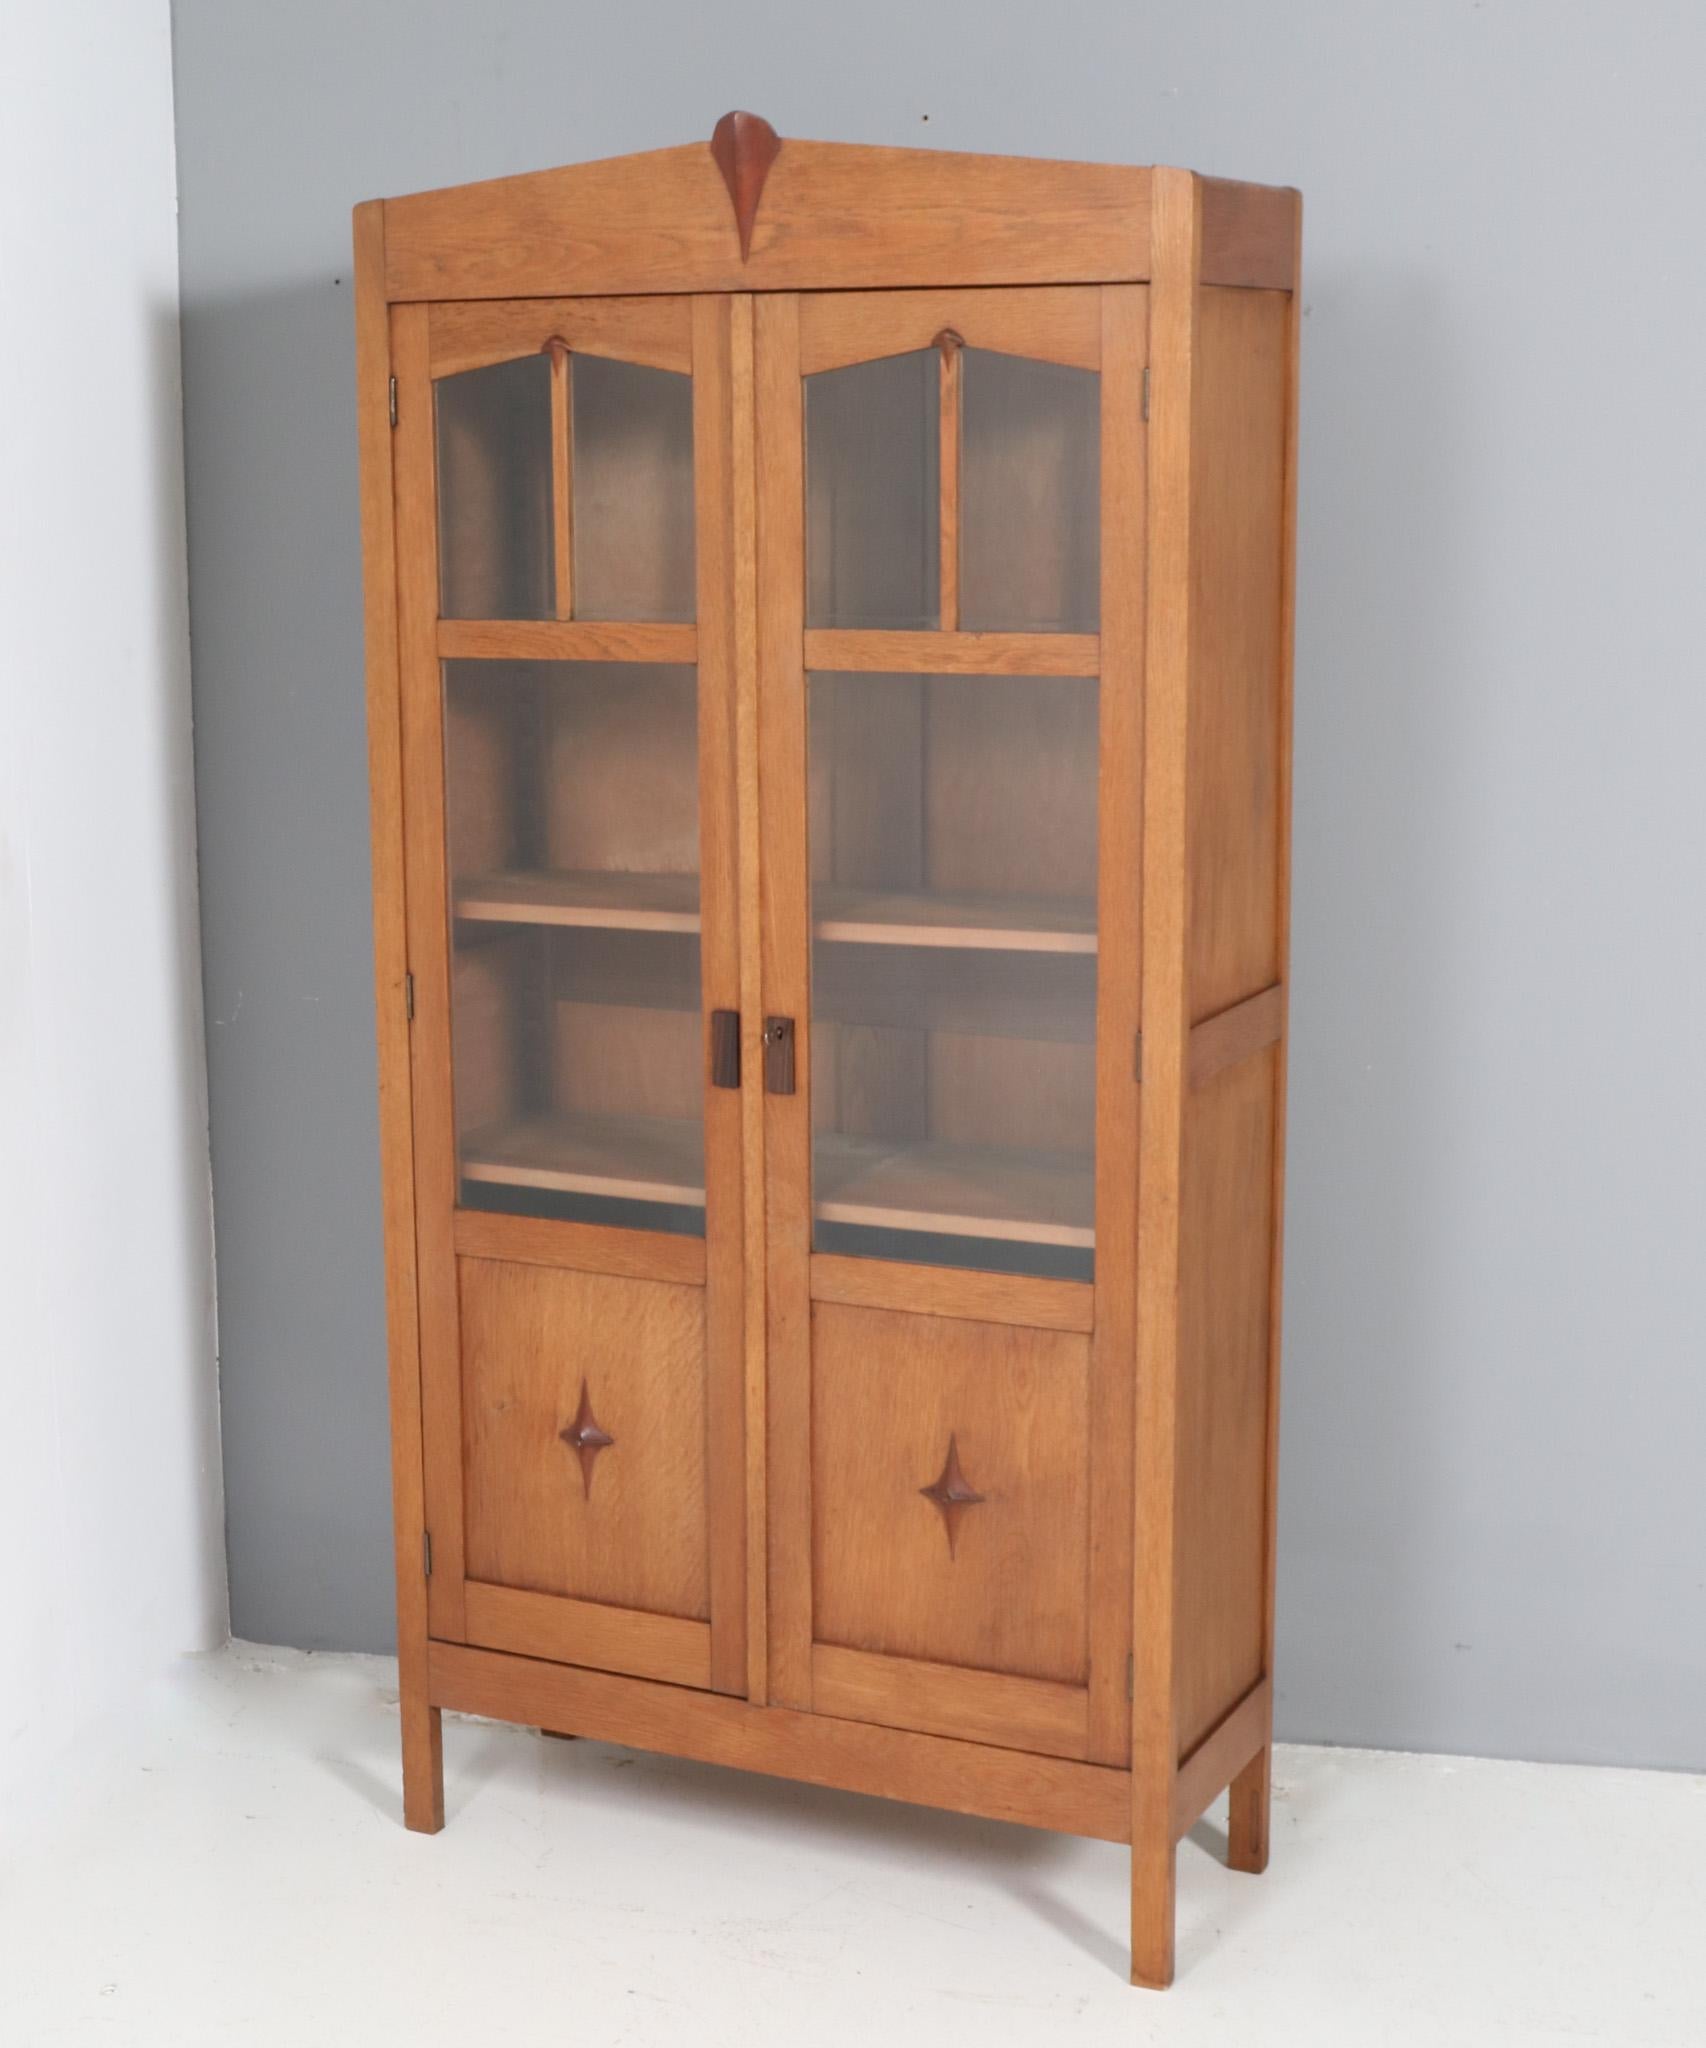 Stunning and rare Art Deco Amsterdamse School bookcase.
Striking Dutch design from the 1920s.
Solid oak and original oak veneer base with original solid padouk decorative elements.
Original small beveled glass panels and original larger plain glass